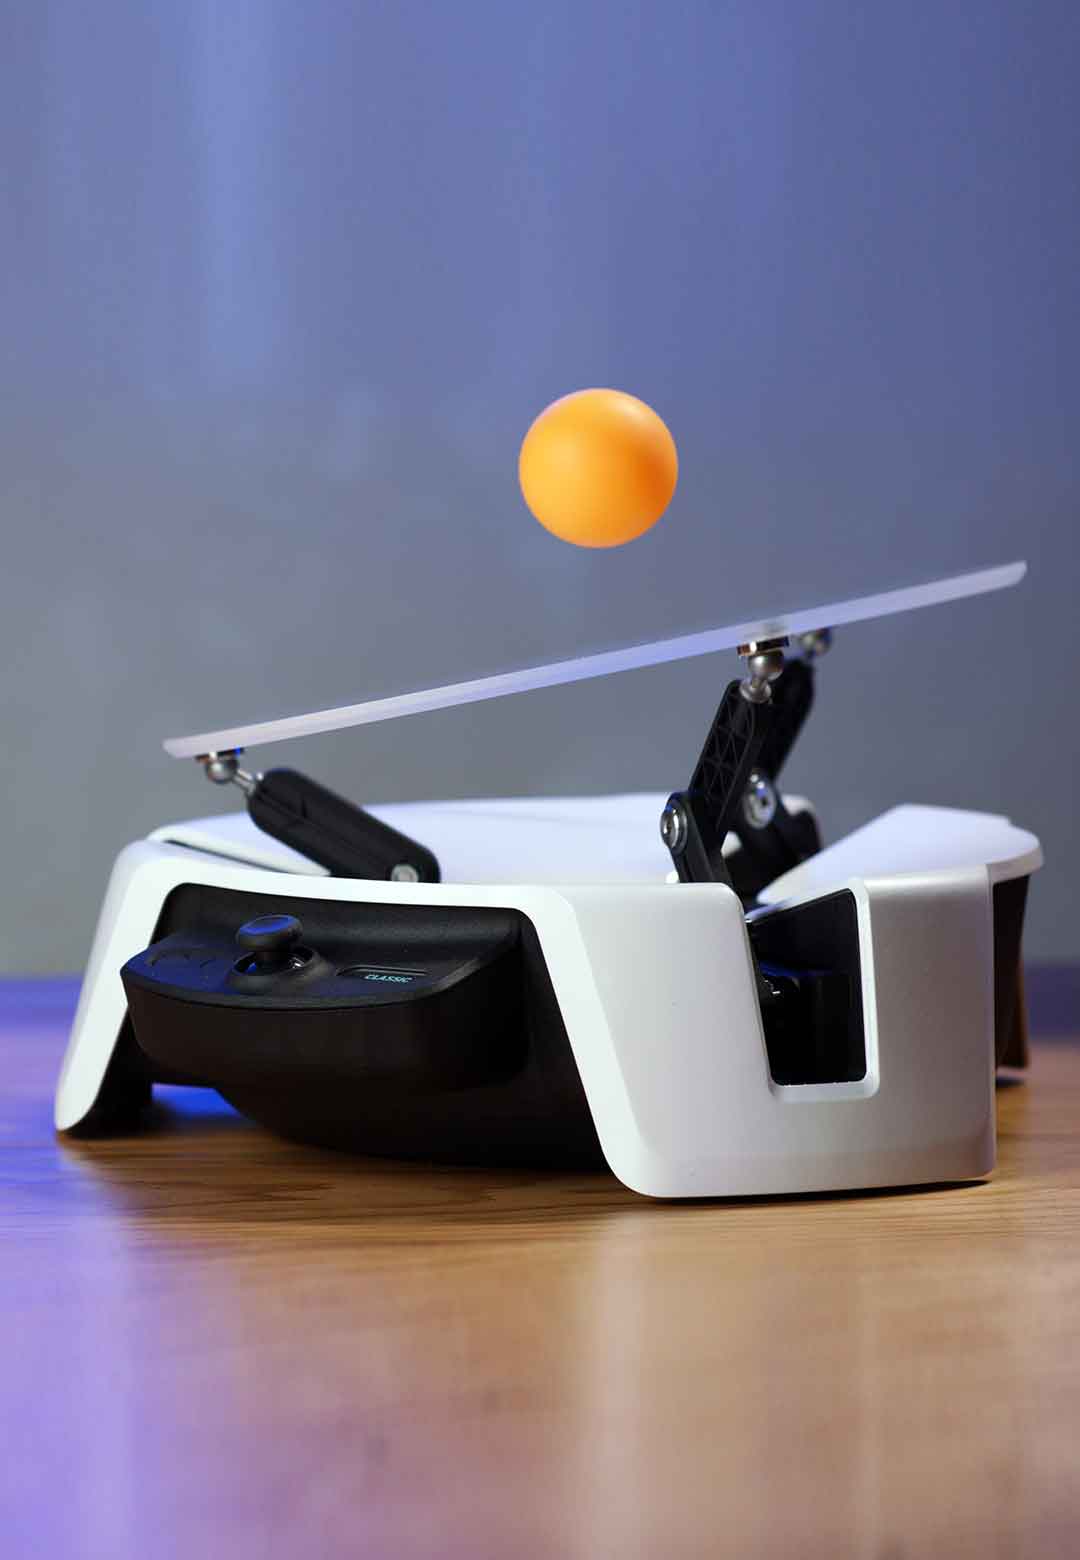 Microsoft and Fresh Consulting present Project Moab, an AI powered self-balancing bot